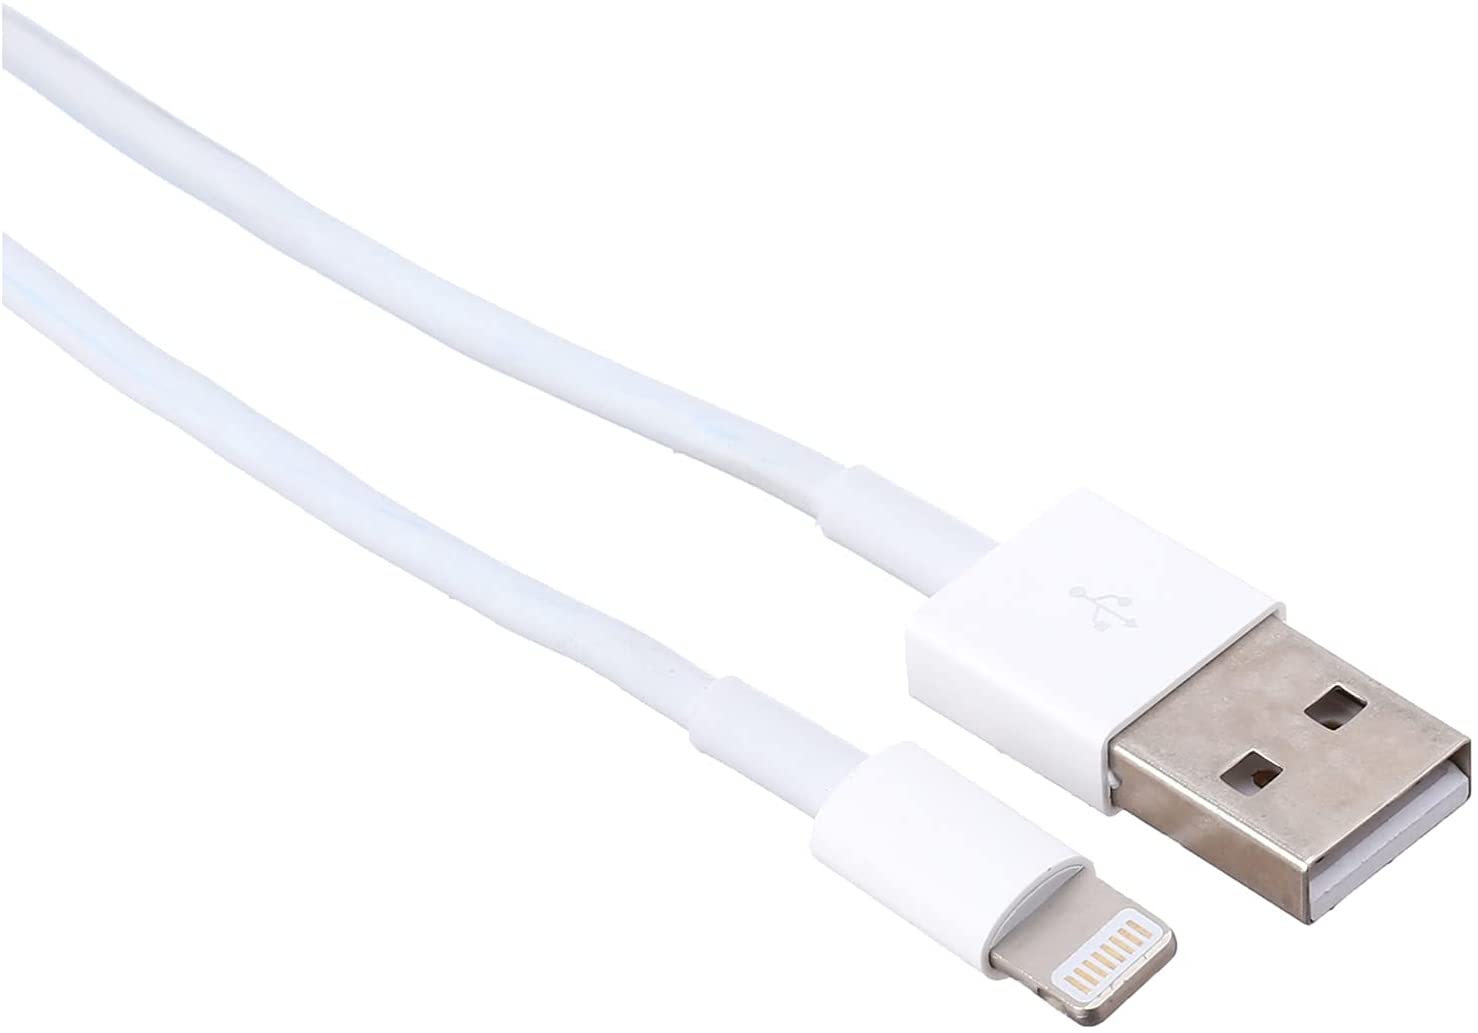 Keendex Lightning USB Charging Cable , 1 M , White - MD818ZM/A